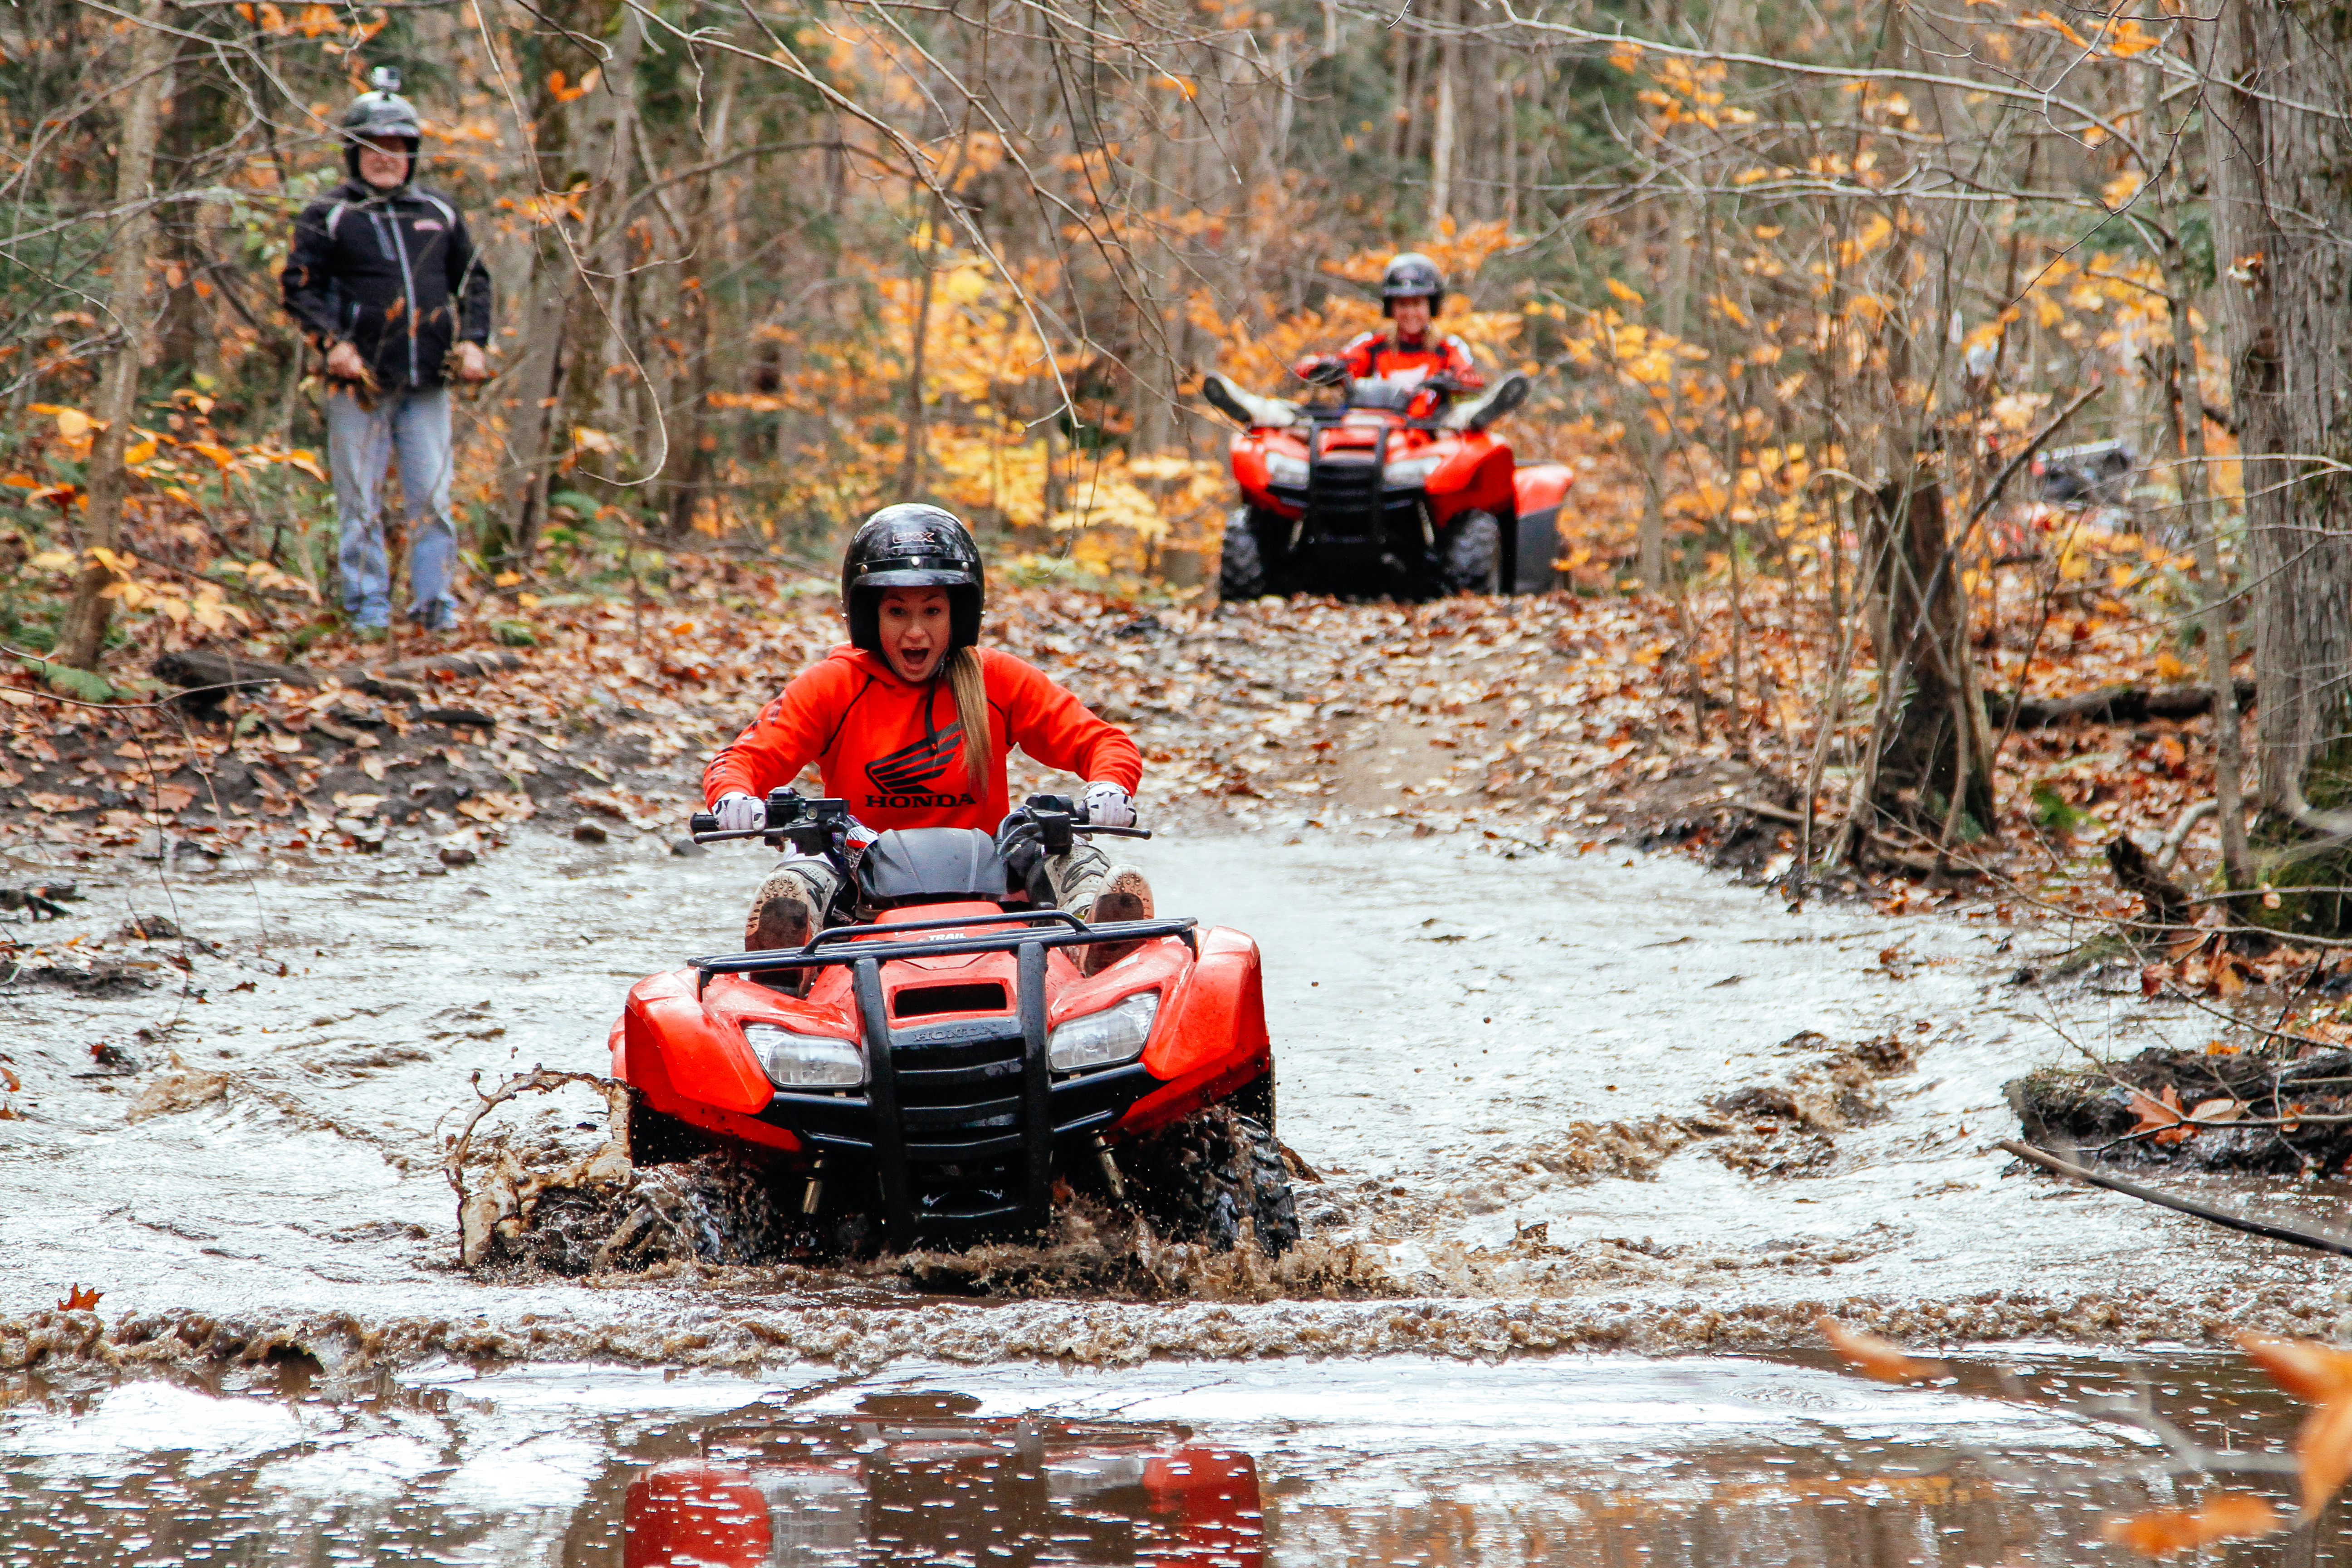 A woman riding an ATV with a shocked look on her face as she splashes through a mud hole in the middle of a forest trail on a grey autumn day. The muddy water is up to the top of the ATV's tires. 